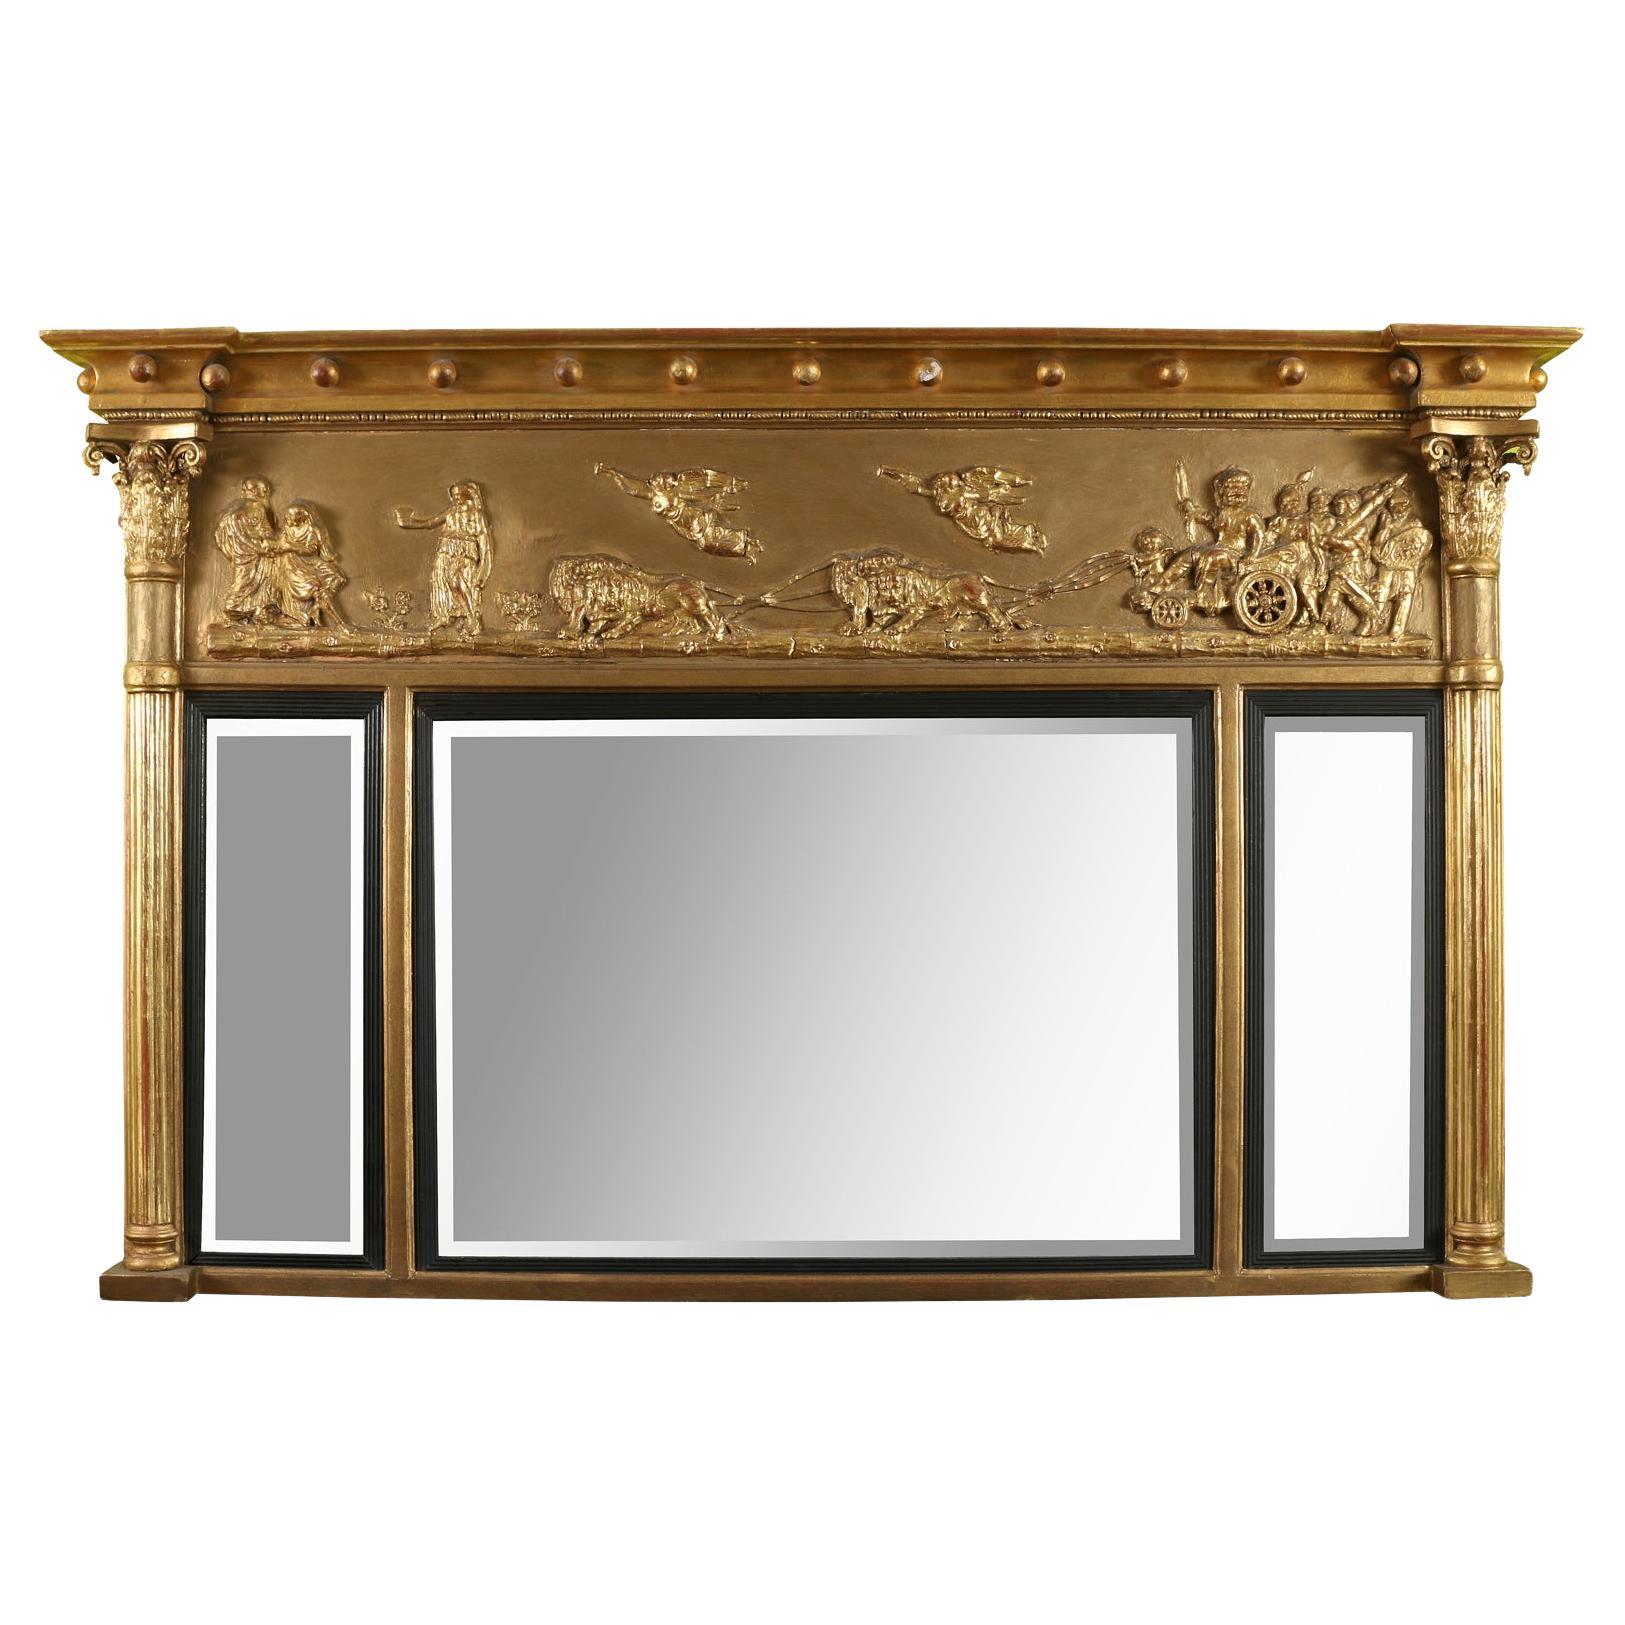 Giltwood English Regency Mirror with Neoclassical Scene 